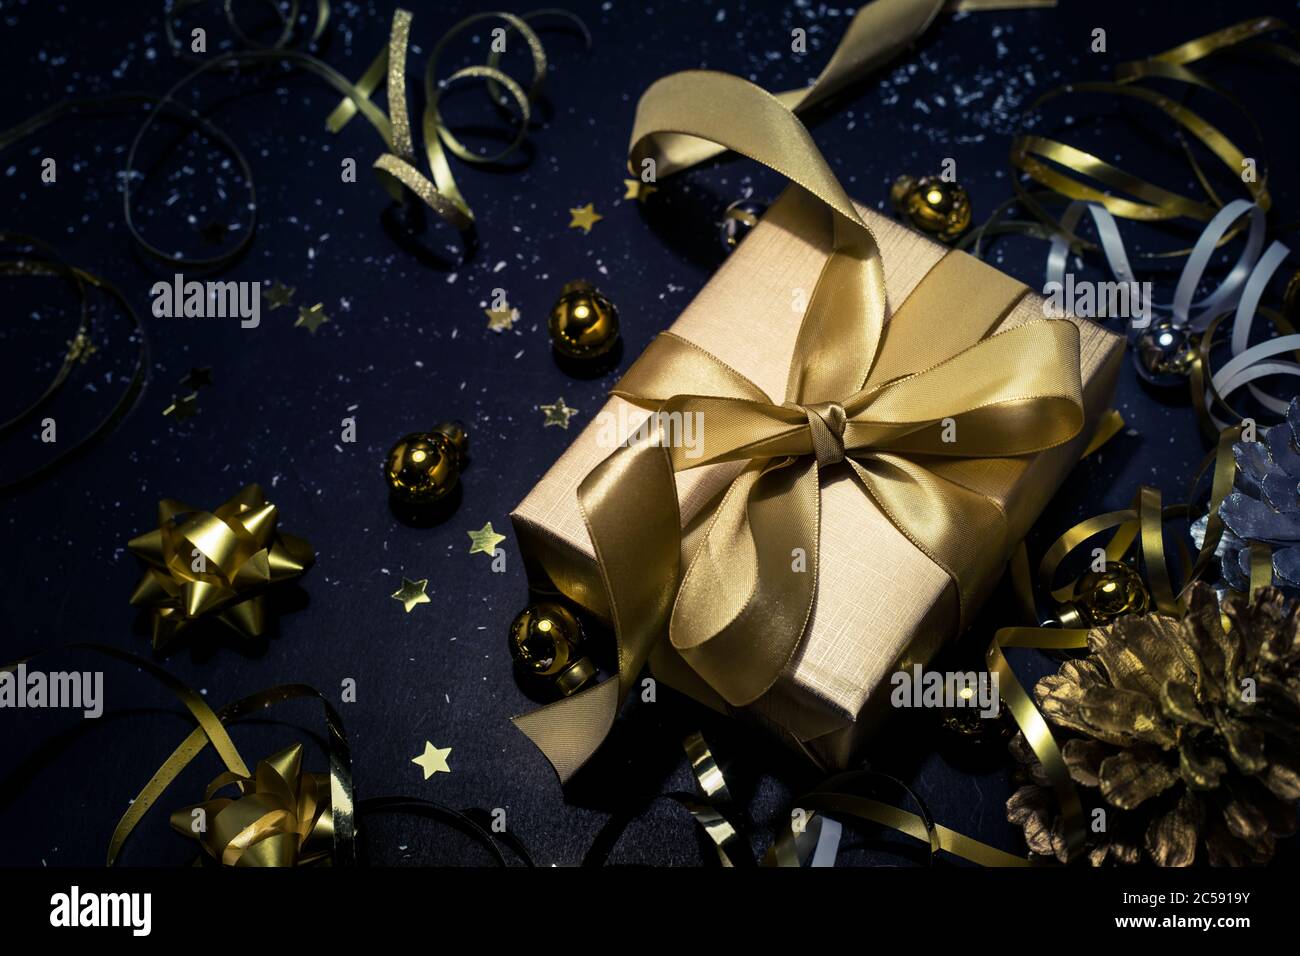 Merry christmas,xmas and celebration concepts with gift box and ornament in golden color on dark background.winter season and anniversary day Stock Photo